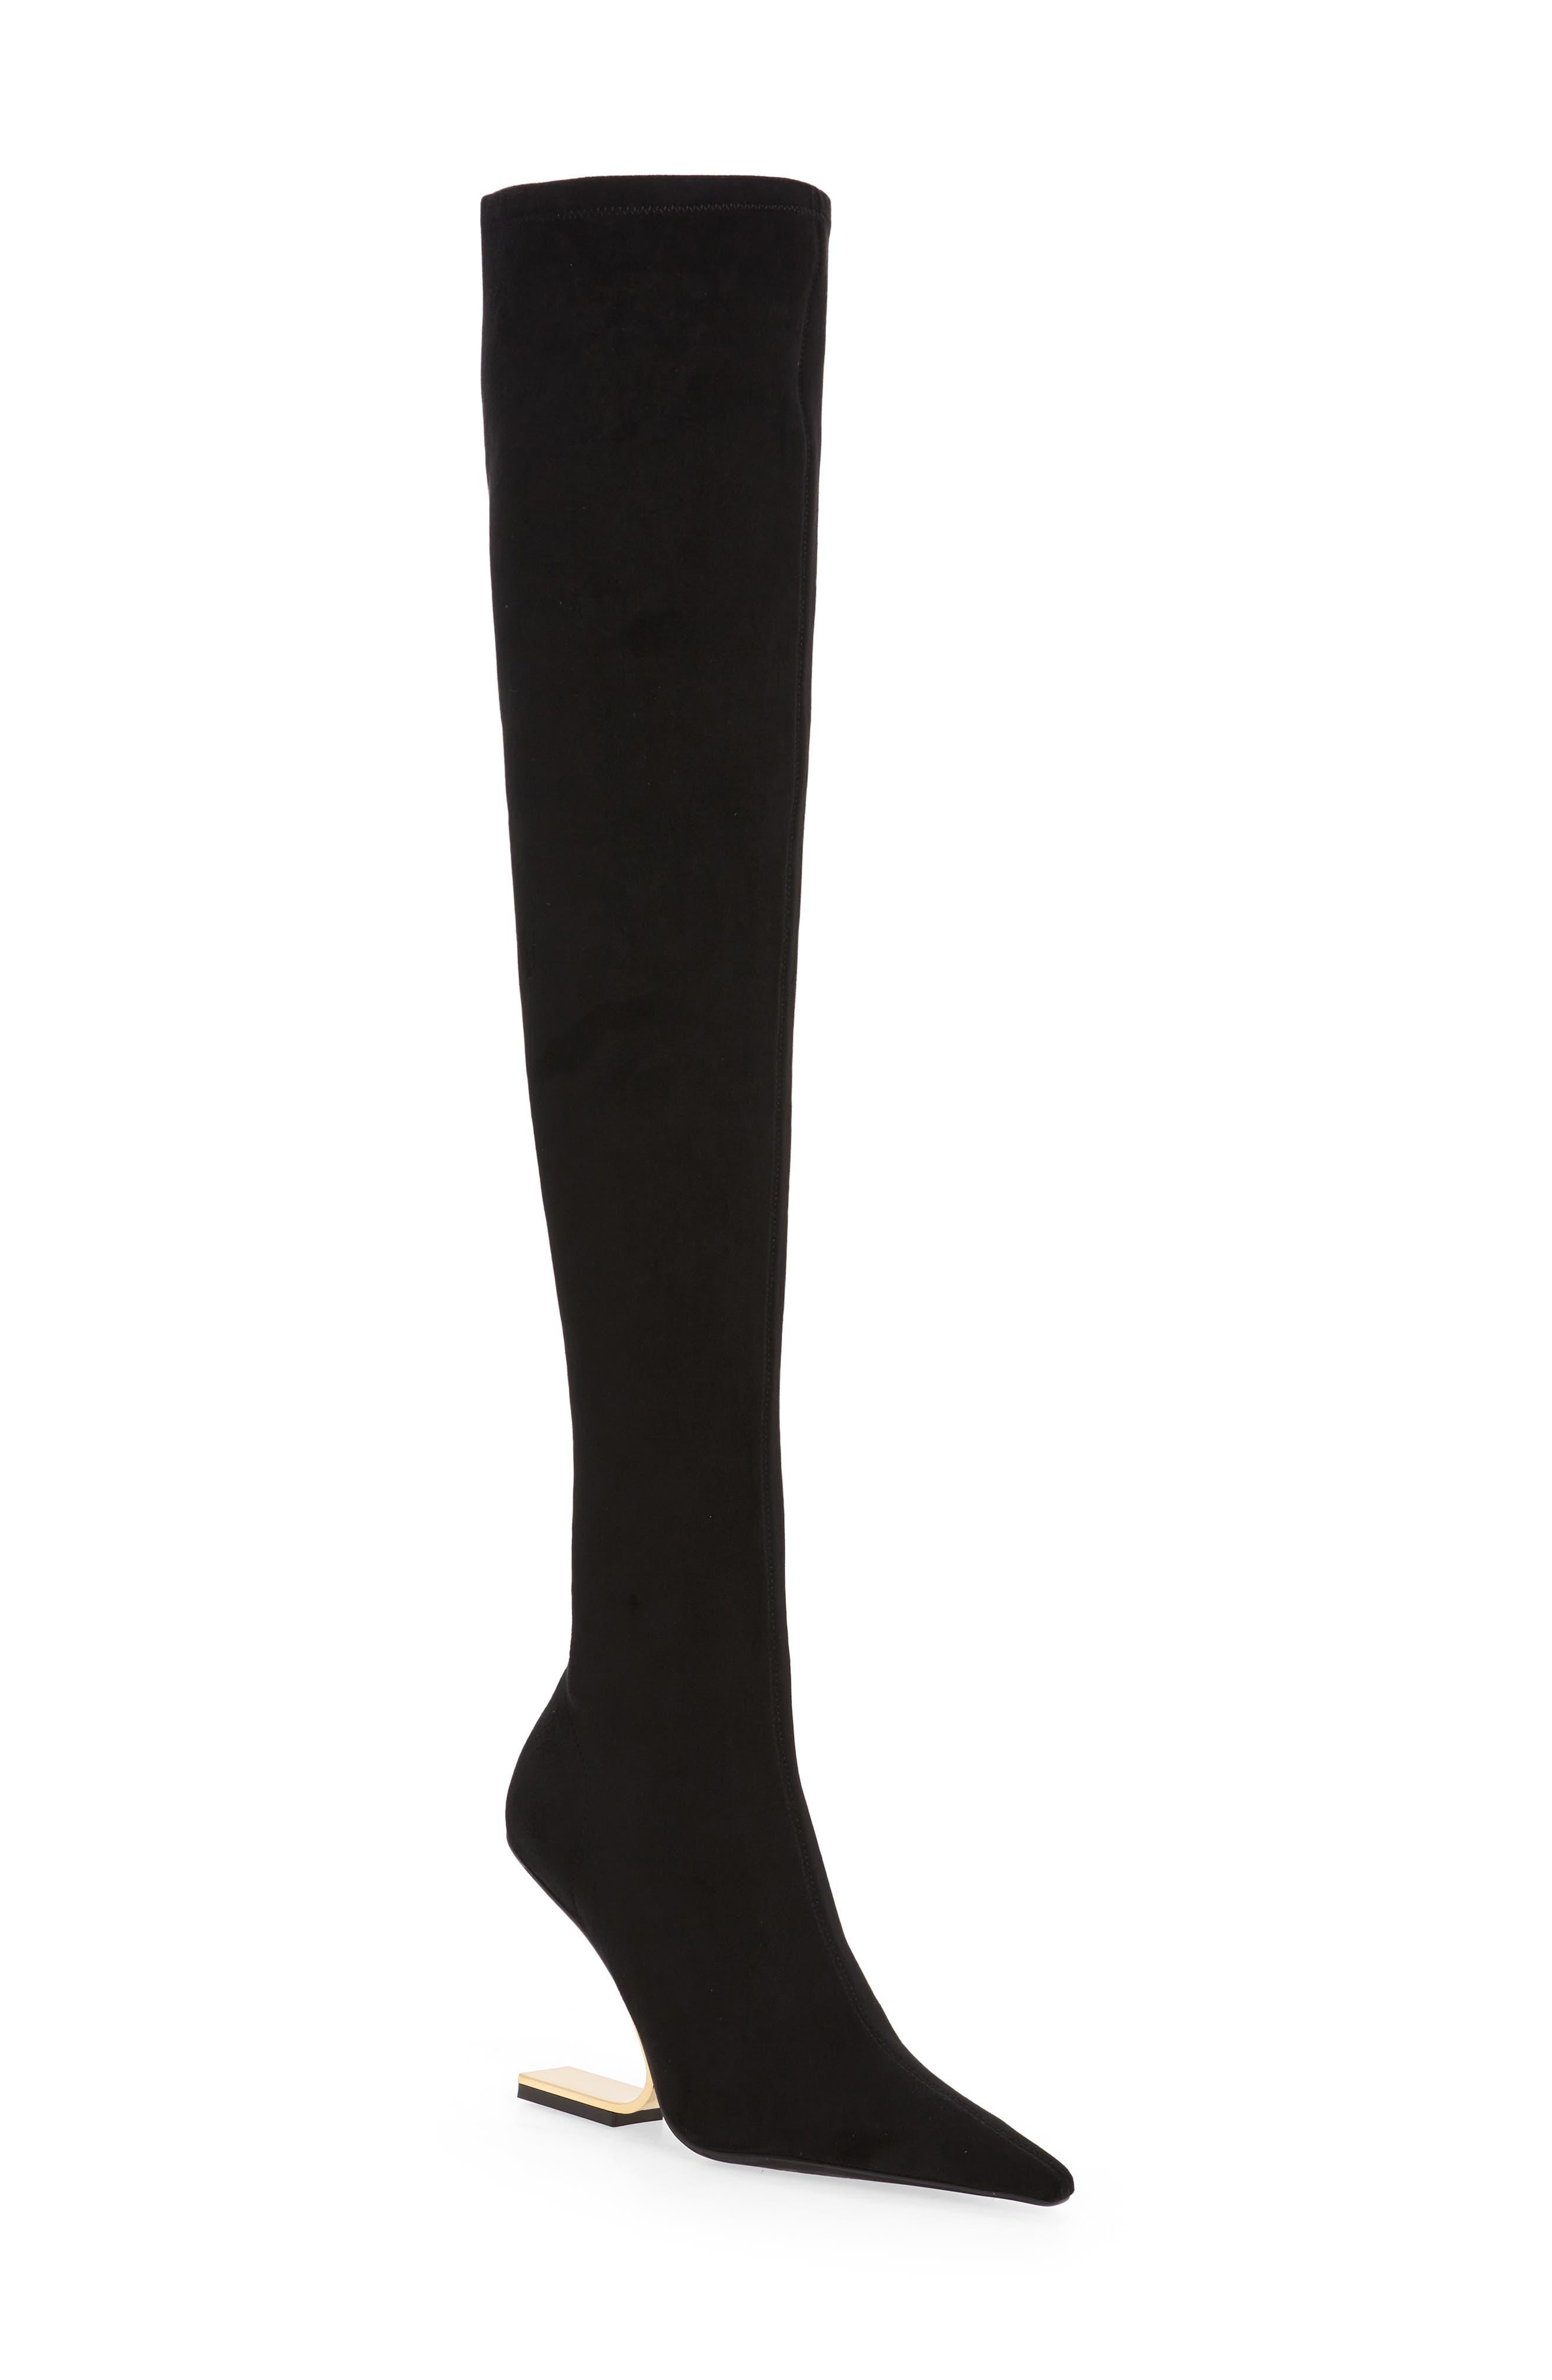 Jeffrey Campbell Compass Over The Knee Boot in Black | Lyst